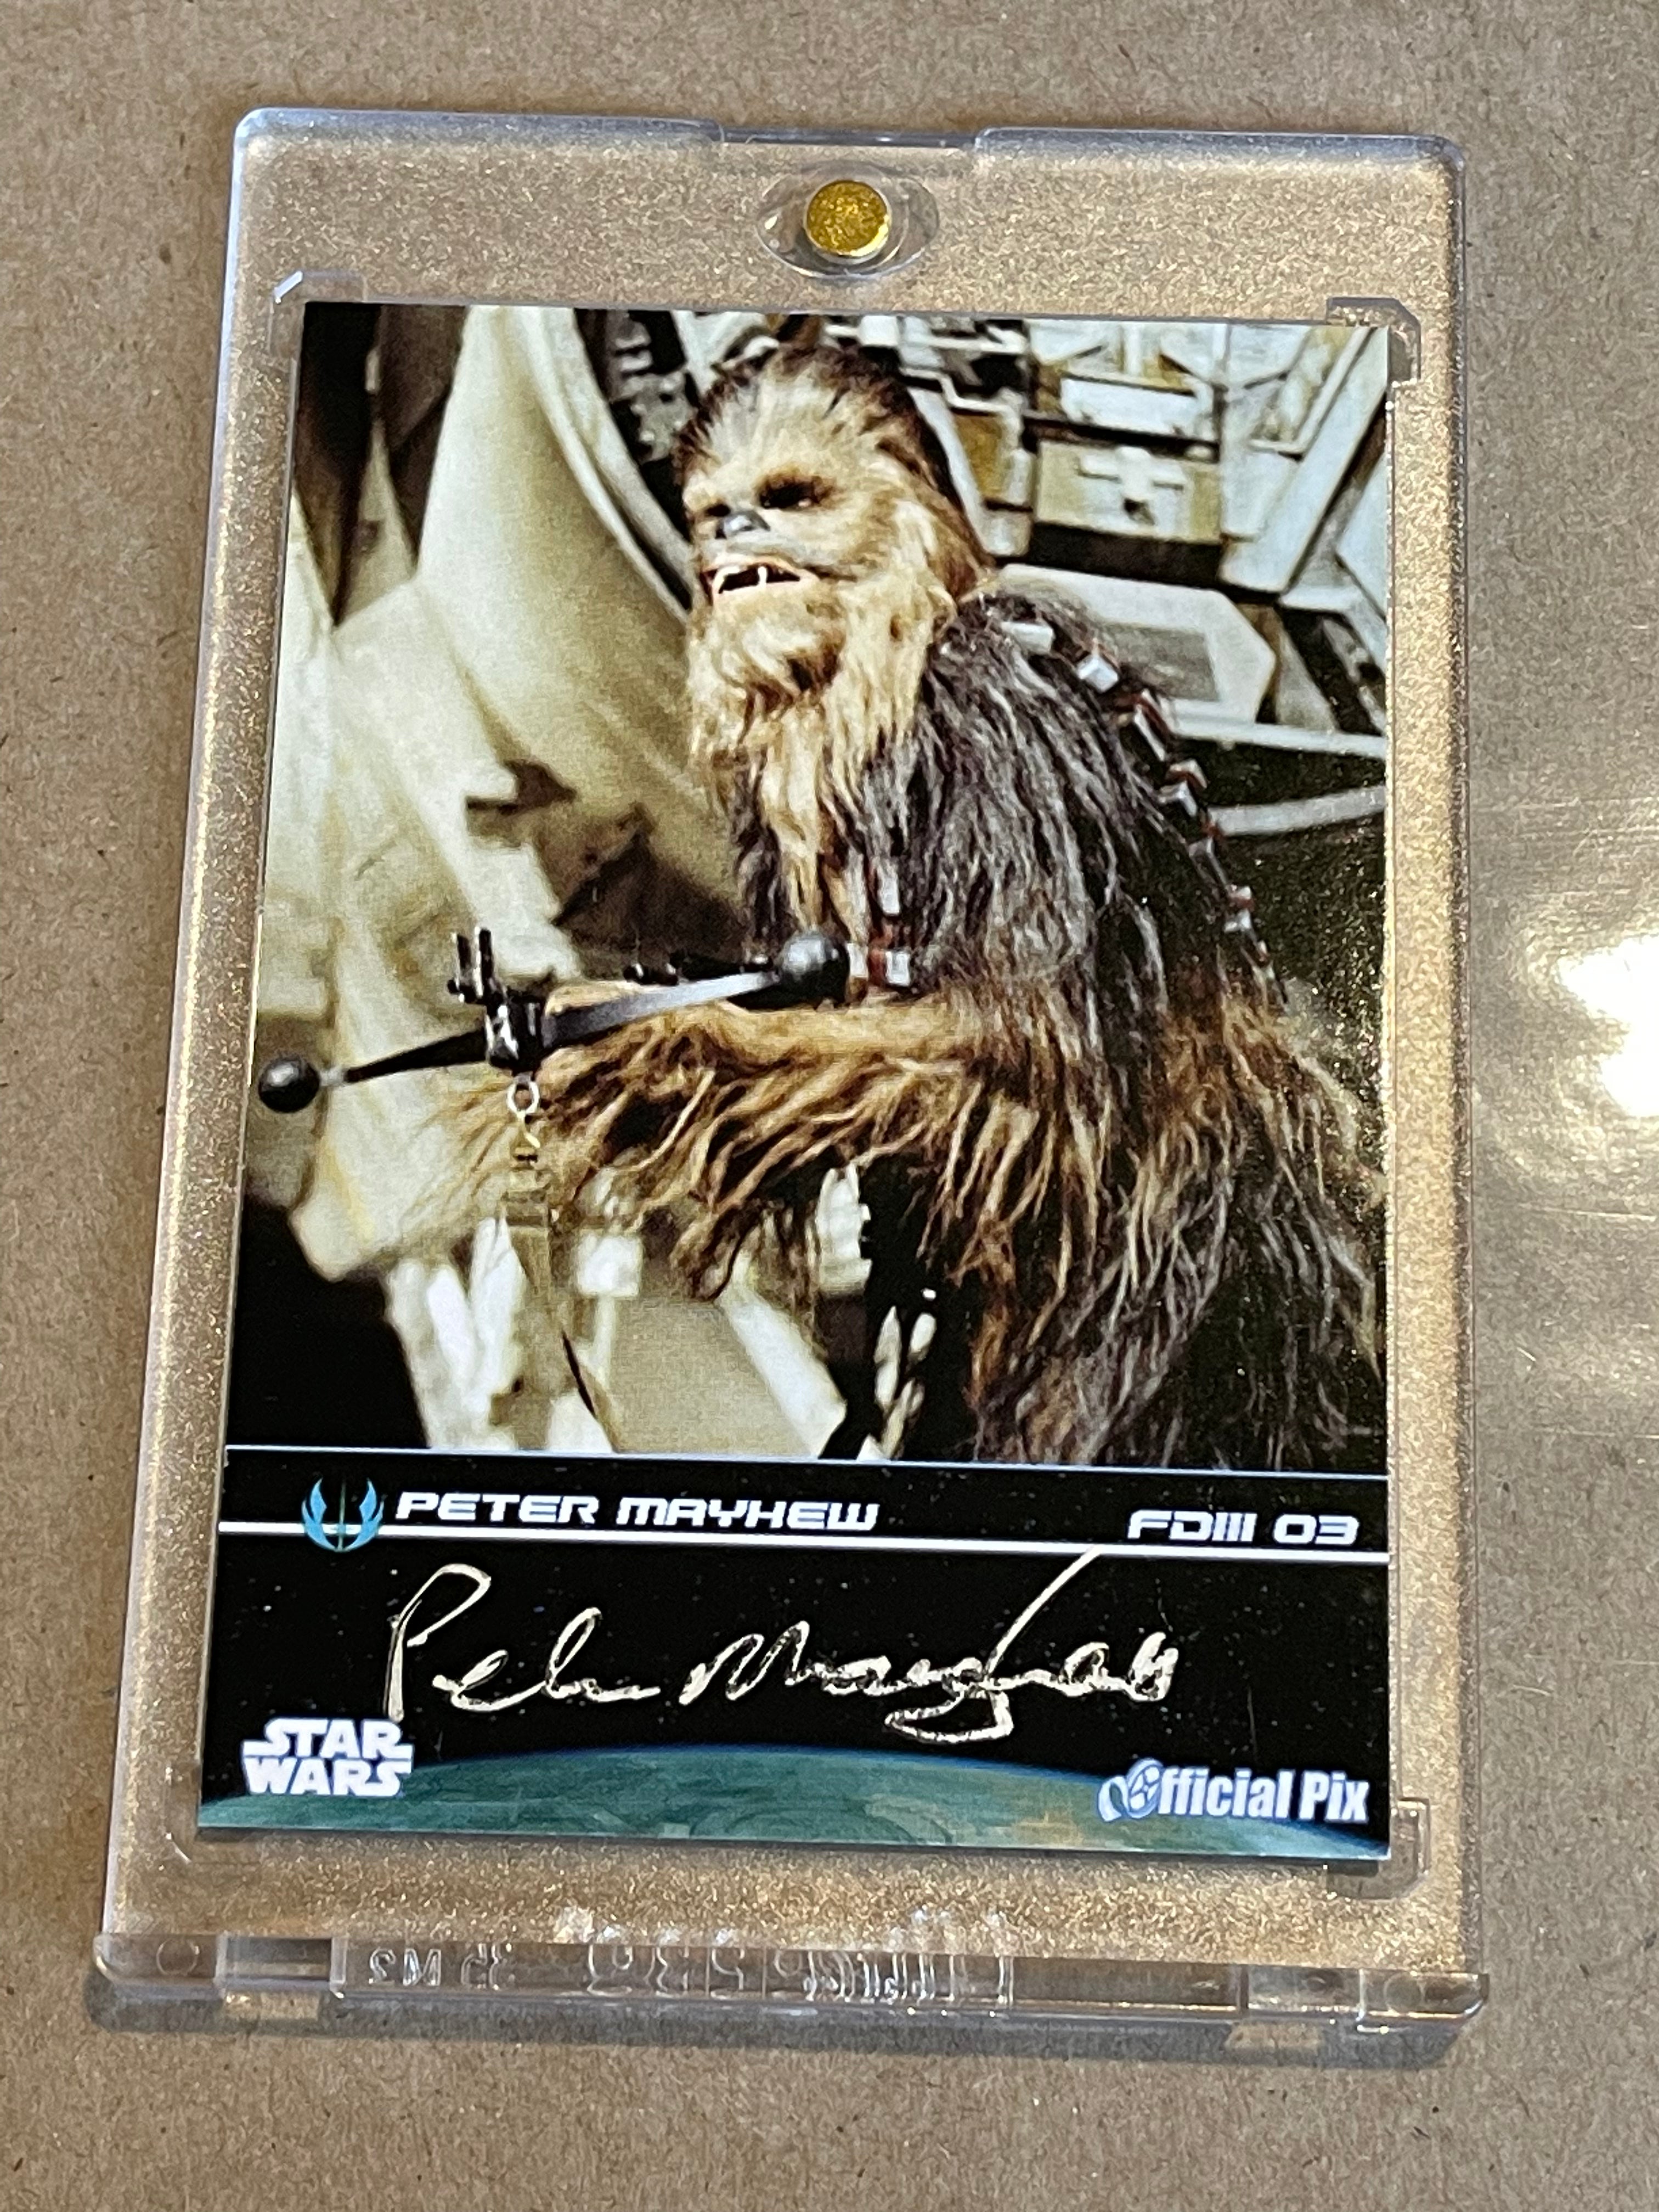 Star Wars Peter Mayhew Chewbacca autographed in person card with Official Pix COA on card back